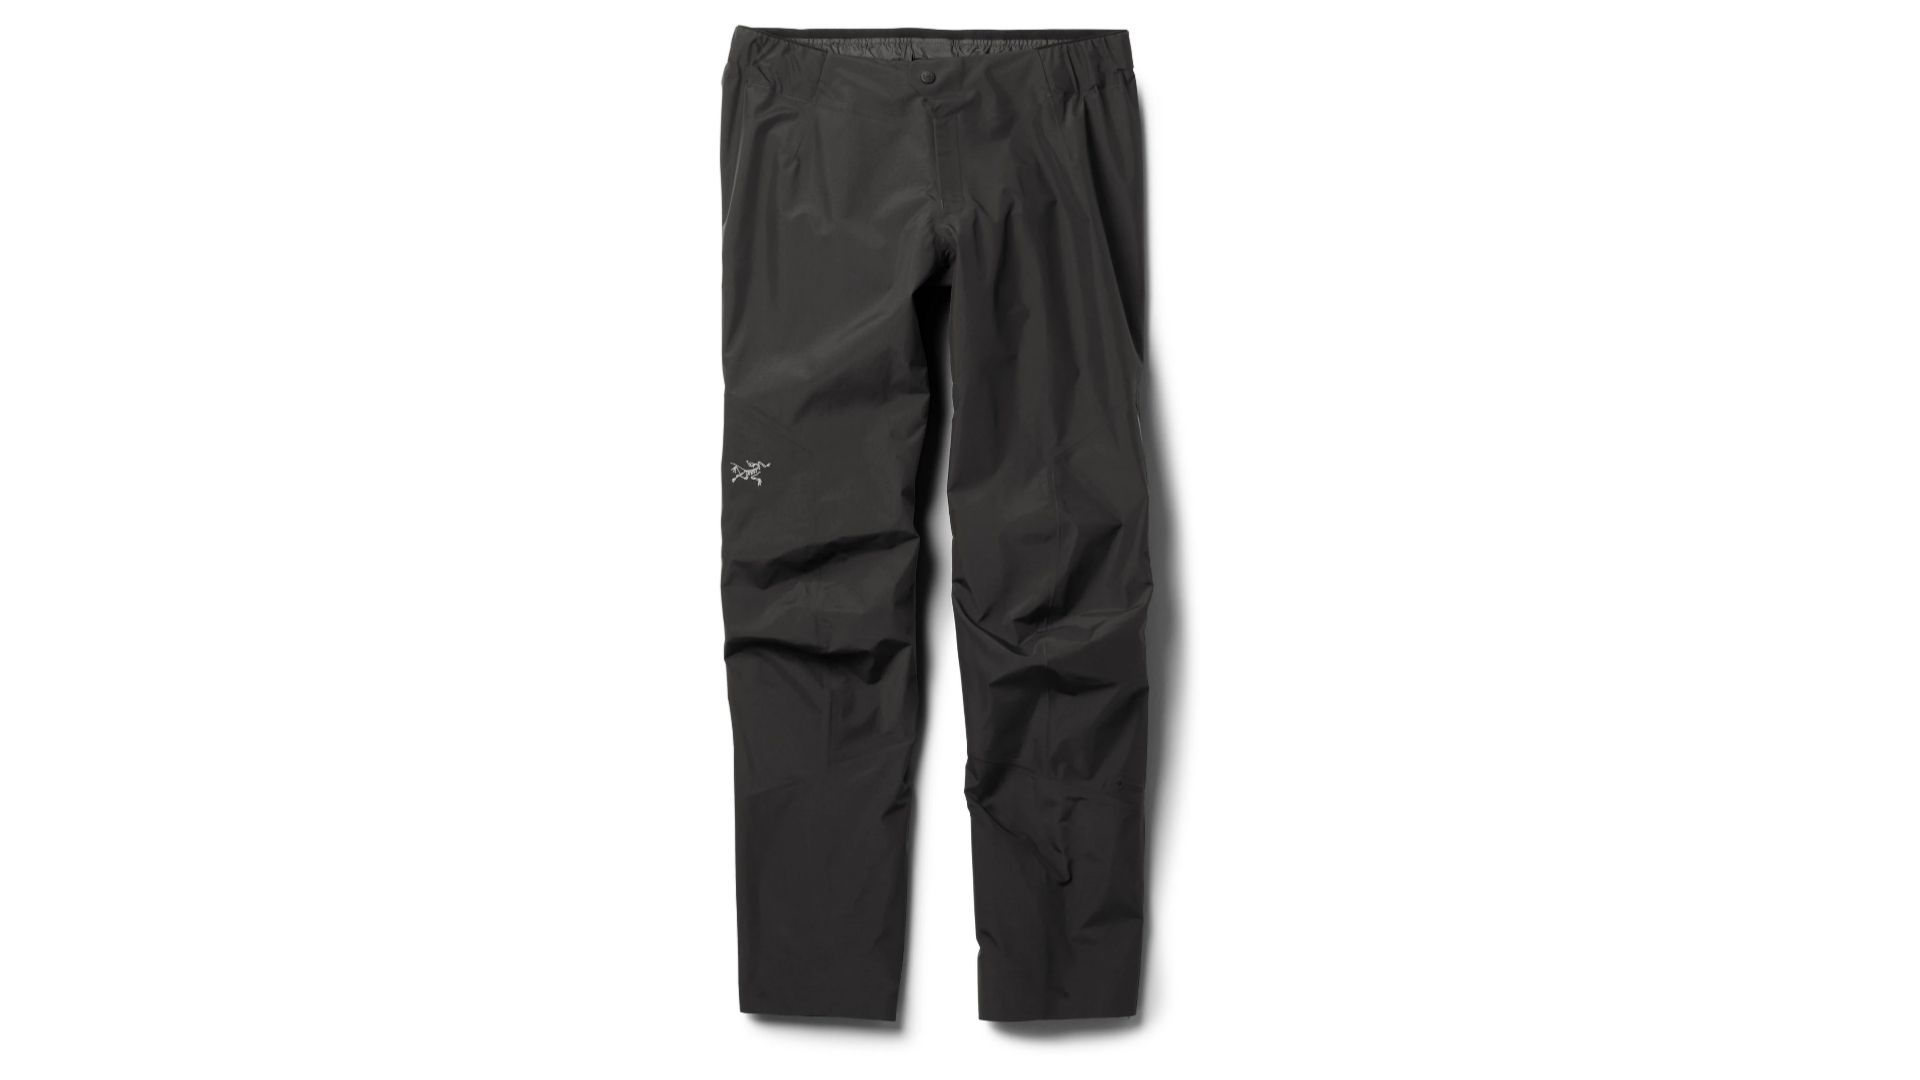 Best Hiking Pants for Men (Review & Buying Guide) in 2021 - Task